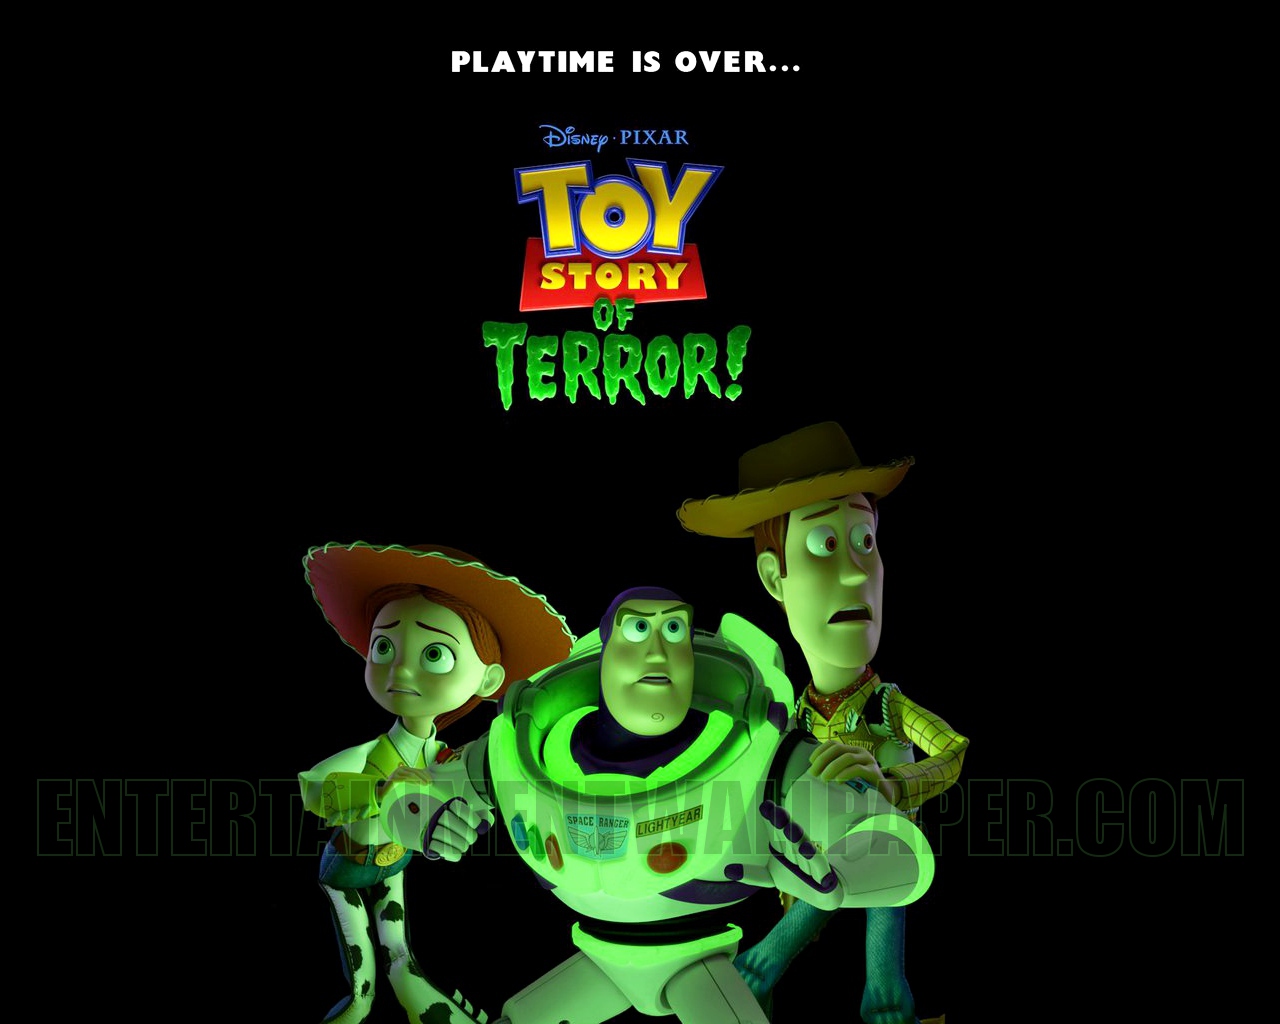  toy story of terror wallpaper 10042007 size 1280x1024 more toy story 1280x1024